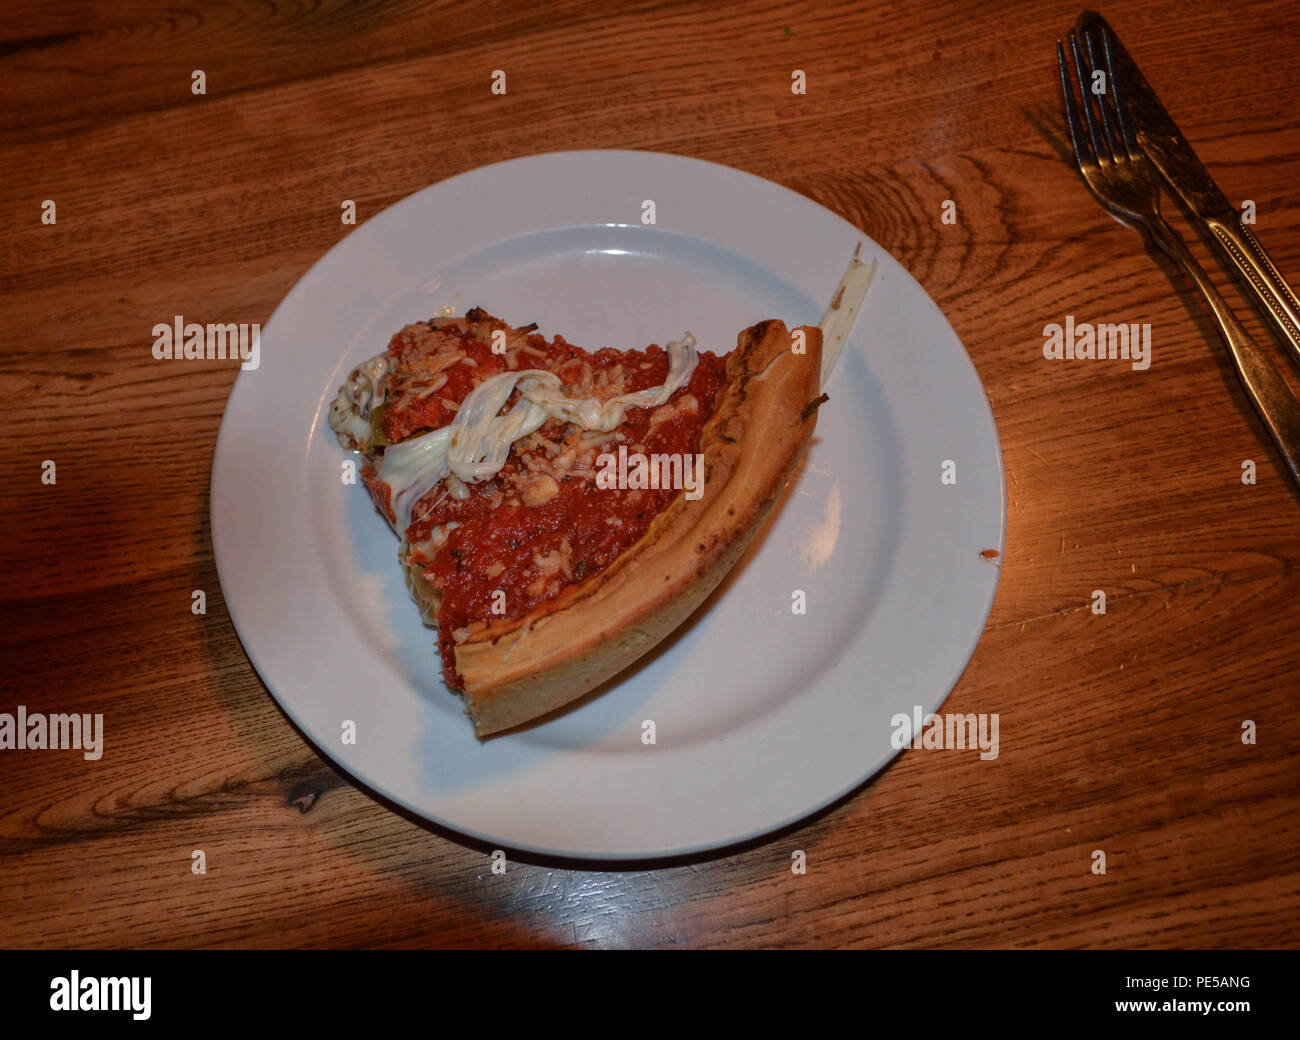 Dining Out A Thick Delicious Slice Of Traditional Chicago Style Baked Italian Stuffed Famous Pizza Food Meal On a Round White Plate with Silverware Stock Photo